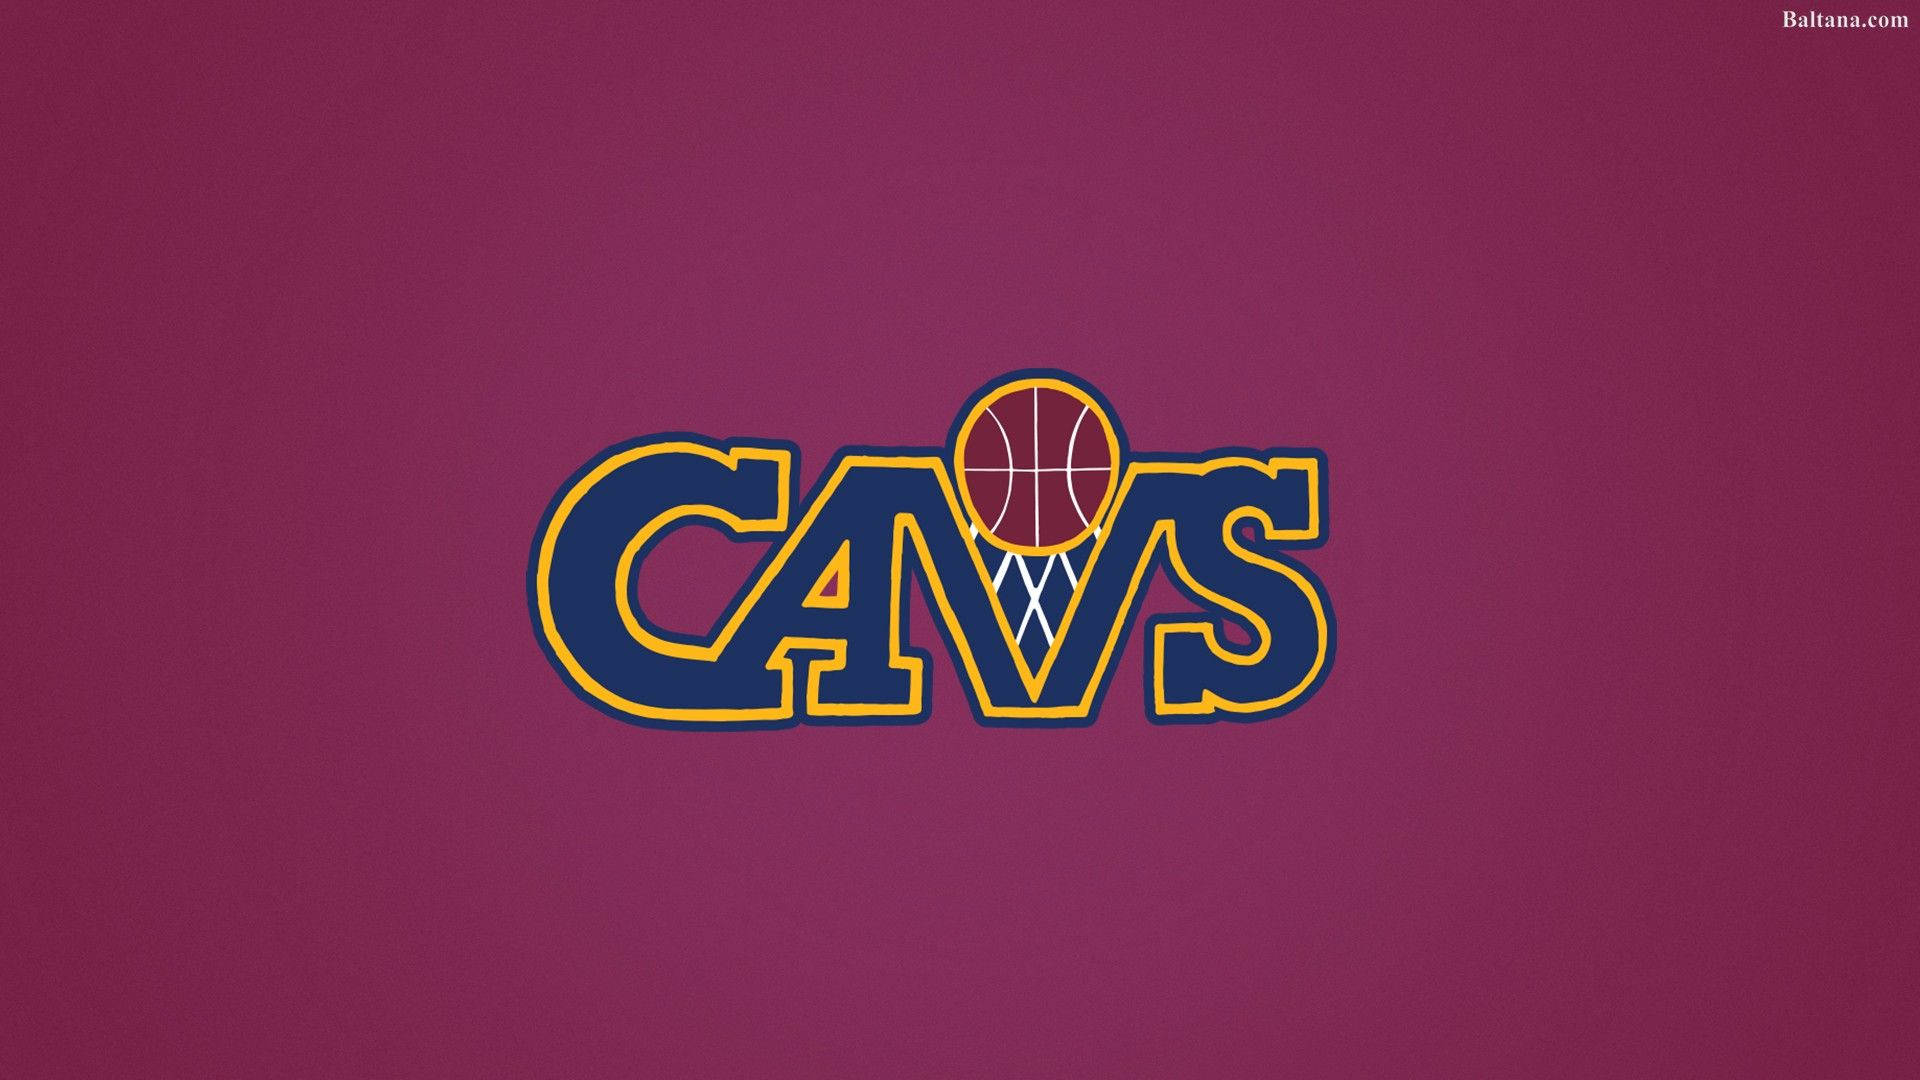 Cleveland Cavaliers Ring Logo Background